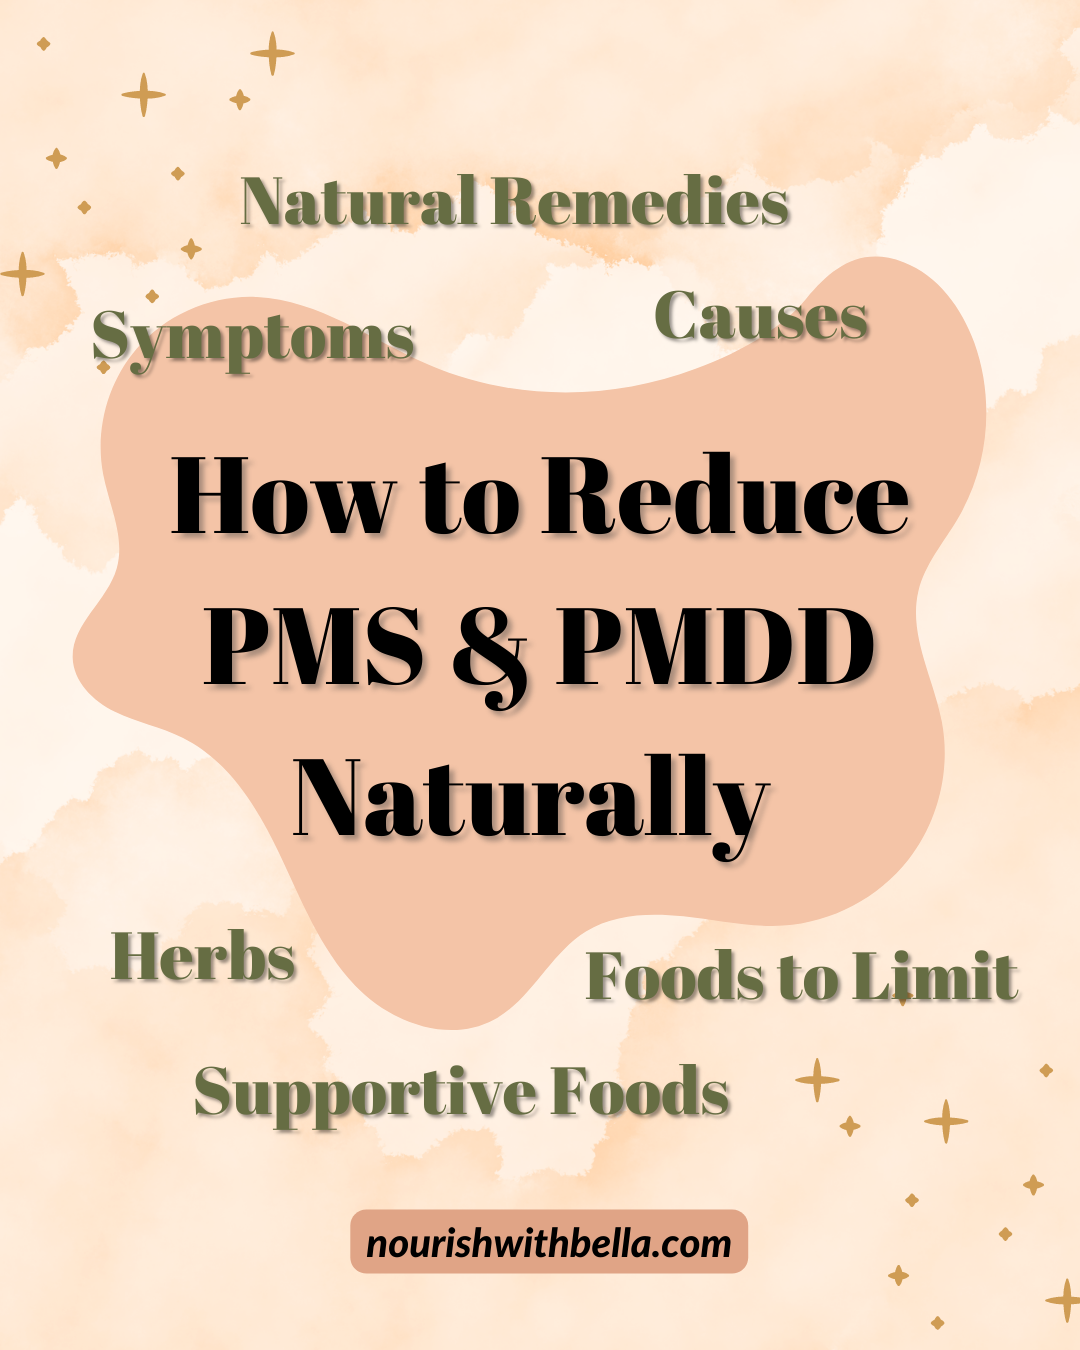 Get Rid of PMS Anxiety & Mood Swings FOR GOOD - 5 Root Causes